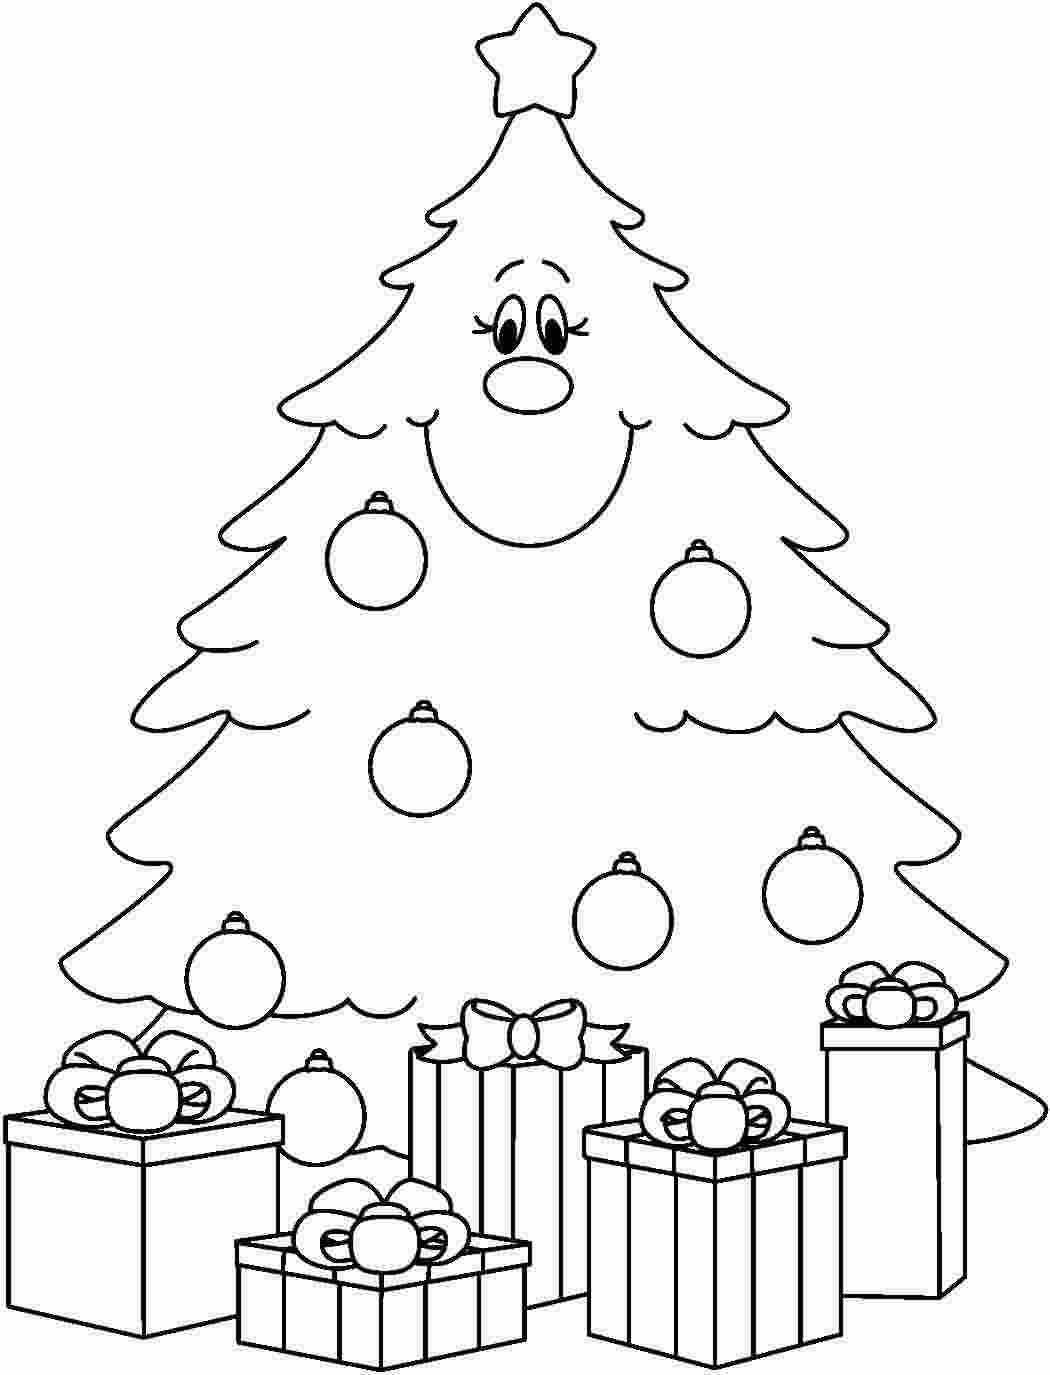 Christmas Tree Coloring Pages Image Picture Photo Wallpaper 20